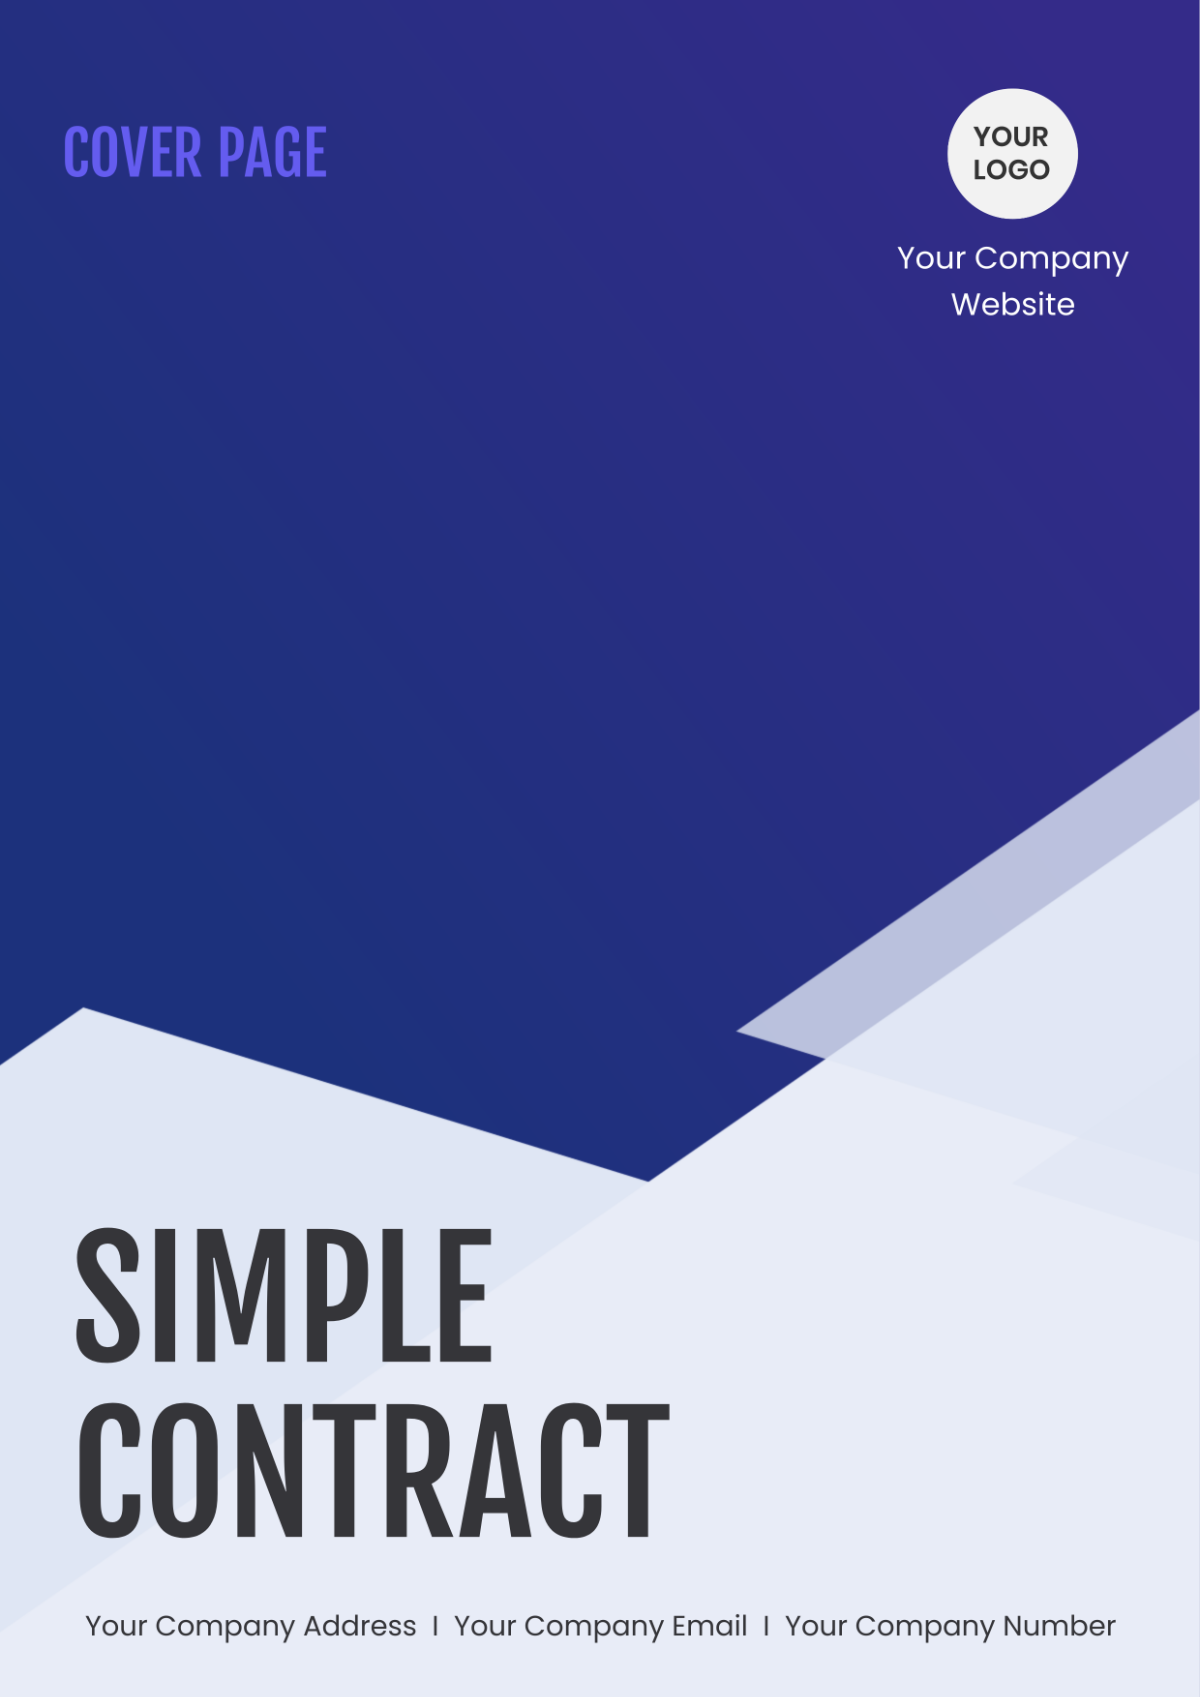 Simple Contract Cover Page